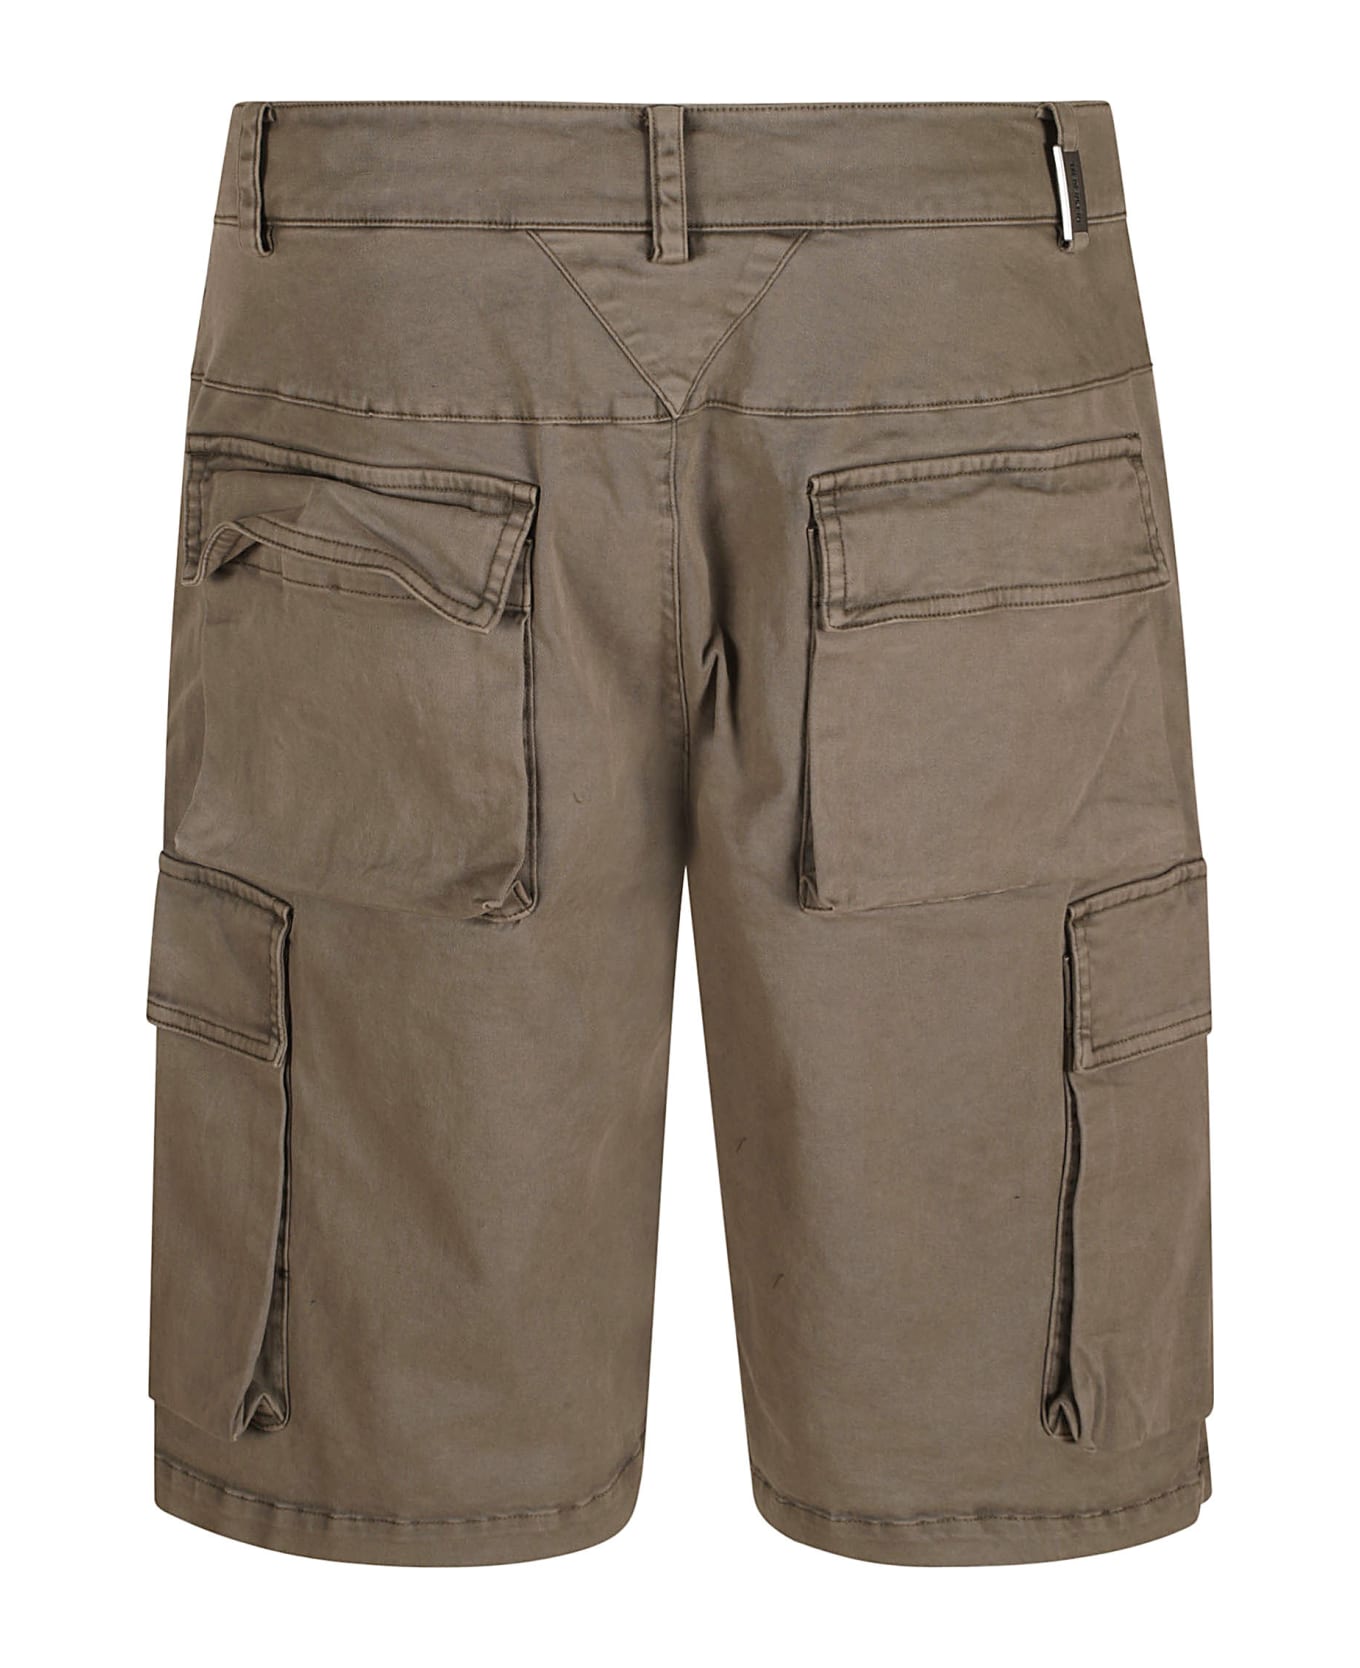 REPRESENT Washed Cargo Shorts - DAWN